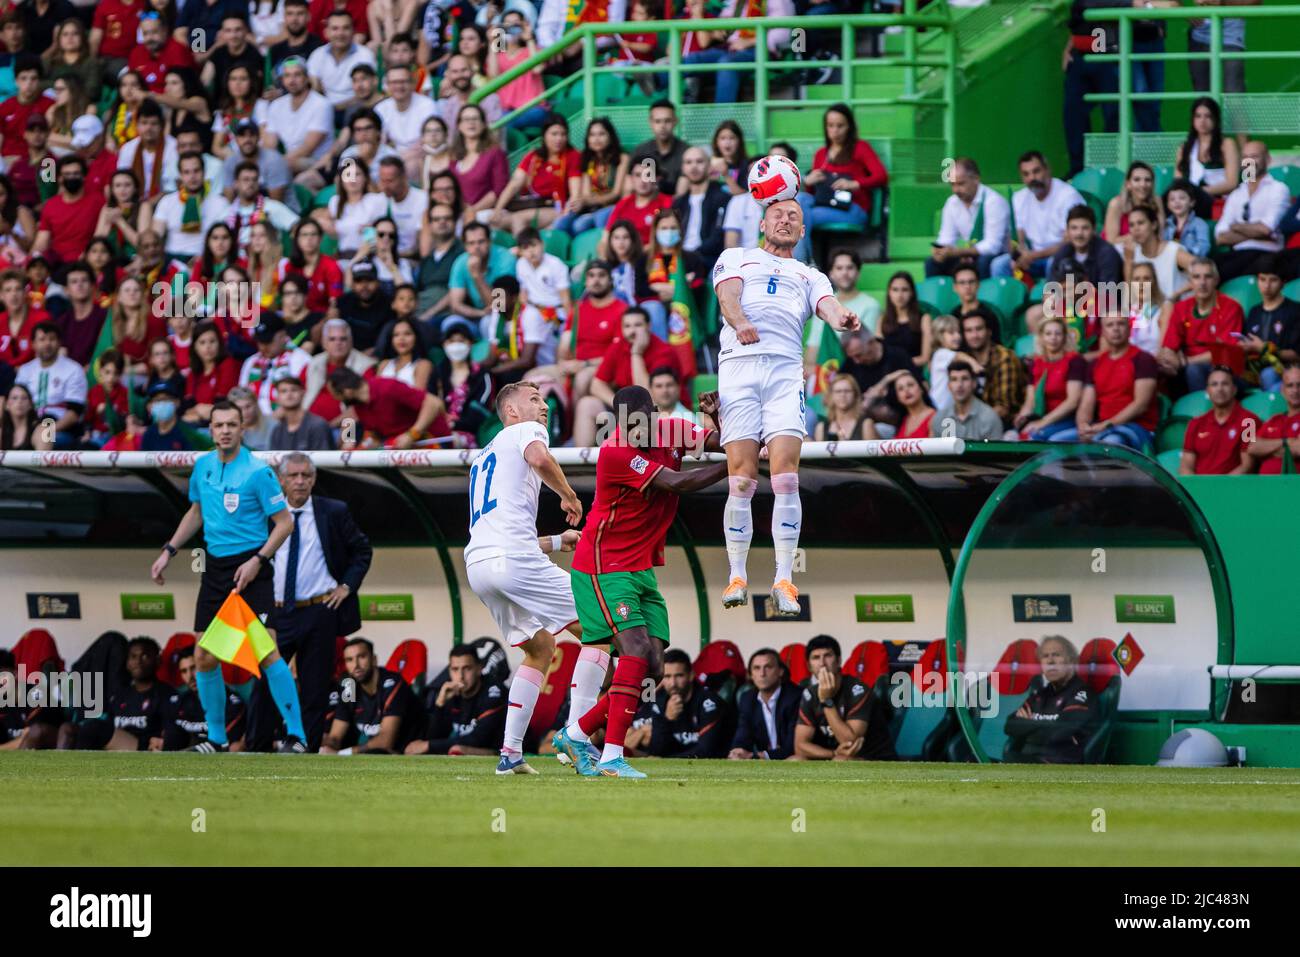 Lisbon, Portugal. 09th June, 2022. Vladimir Coufal (R) Tomas Soucek (L) of Czech Republic and William Carvalho of Portugal (C) seen in action during the UEFA Nations League, League A group 2 match between Portugal and Czech Republic at the Jose Alvalade stadium. (Final score; Portugal 2:0 Czech Republic) Credit: SOPA Images Limited/Alamy Live News Stock Photo